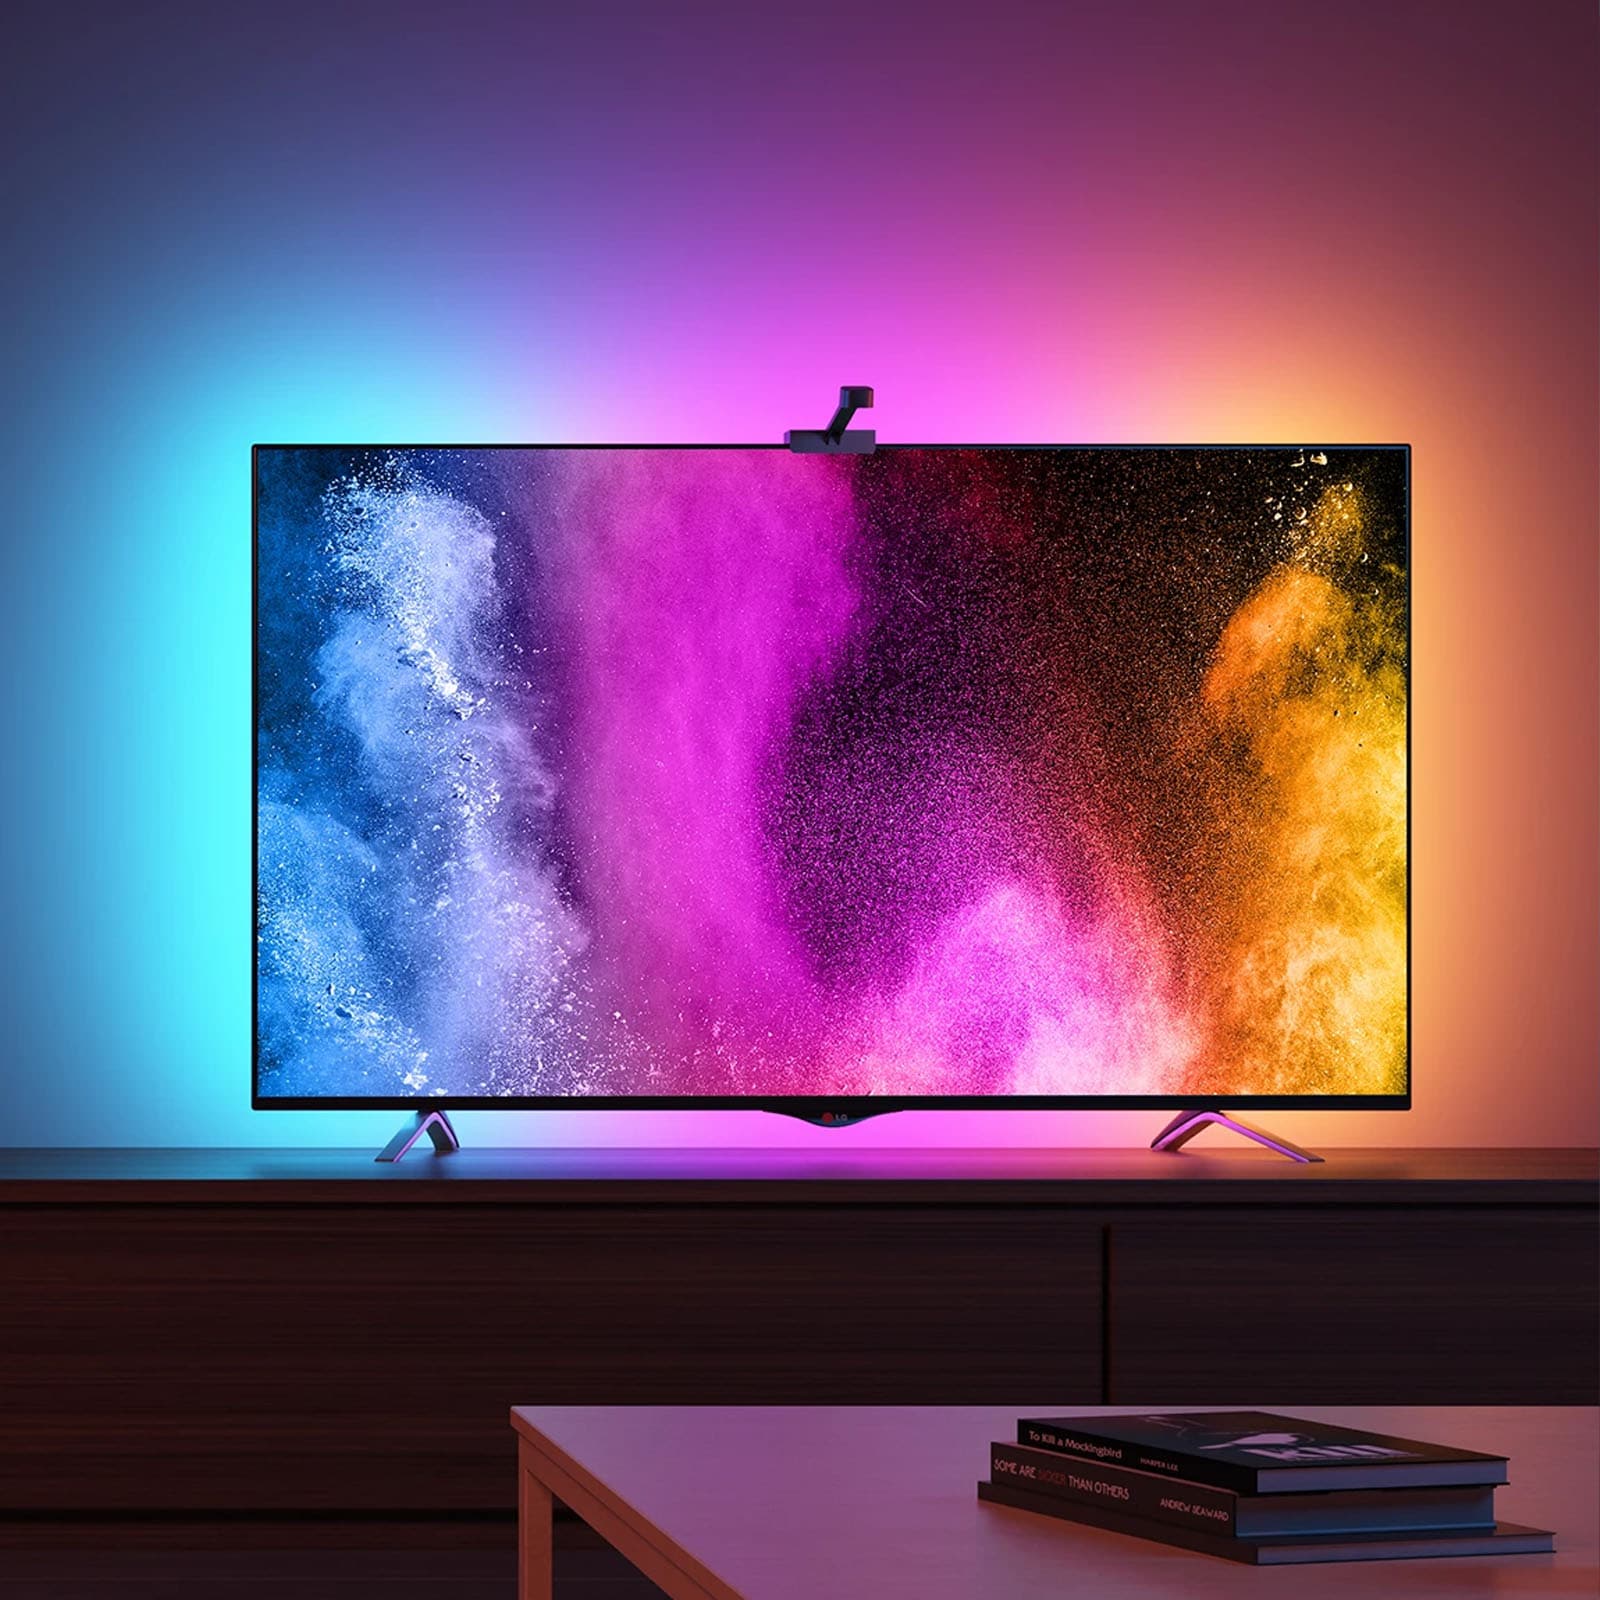 Phillips Ambilight? Govee Immersion TV RGBIC Light Strip is better 